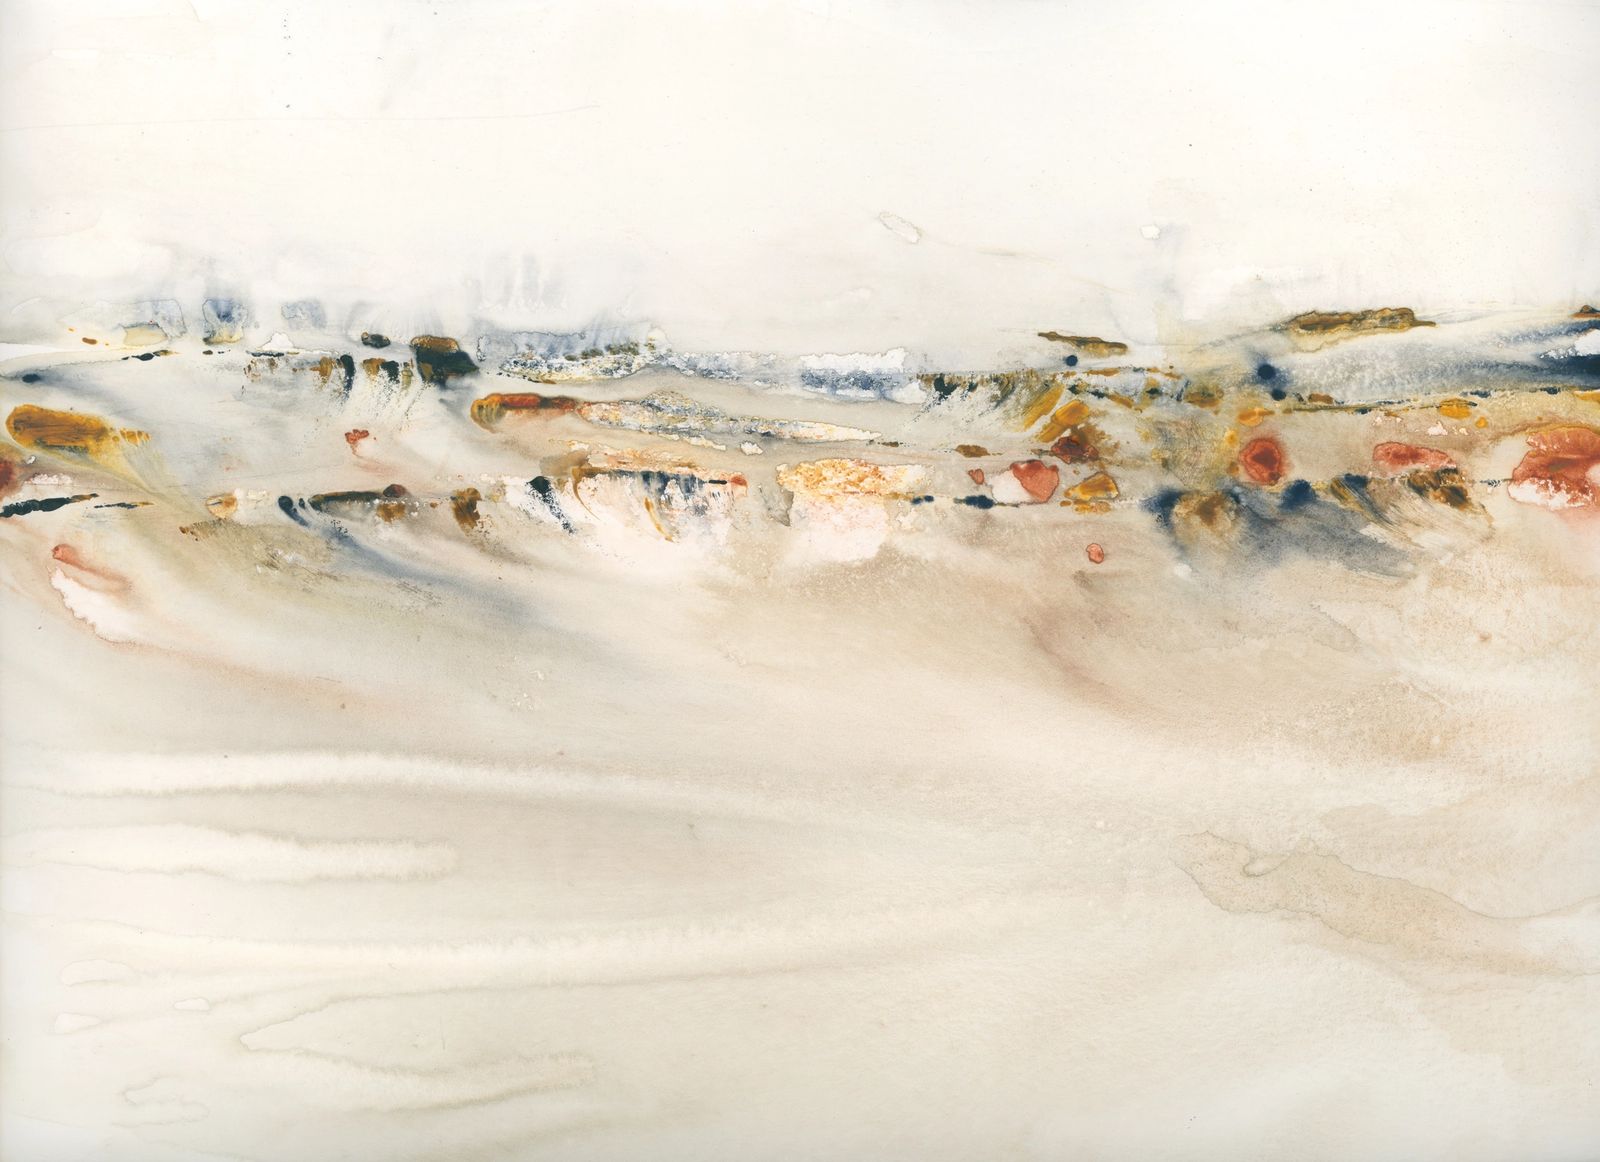 An abstract watercolor landscape in tones of biege, sienna and grey.